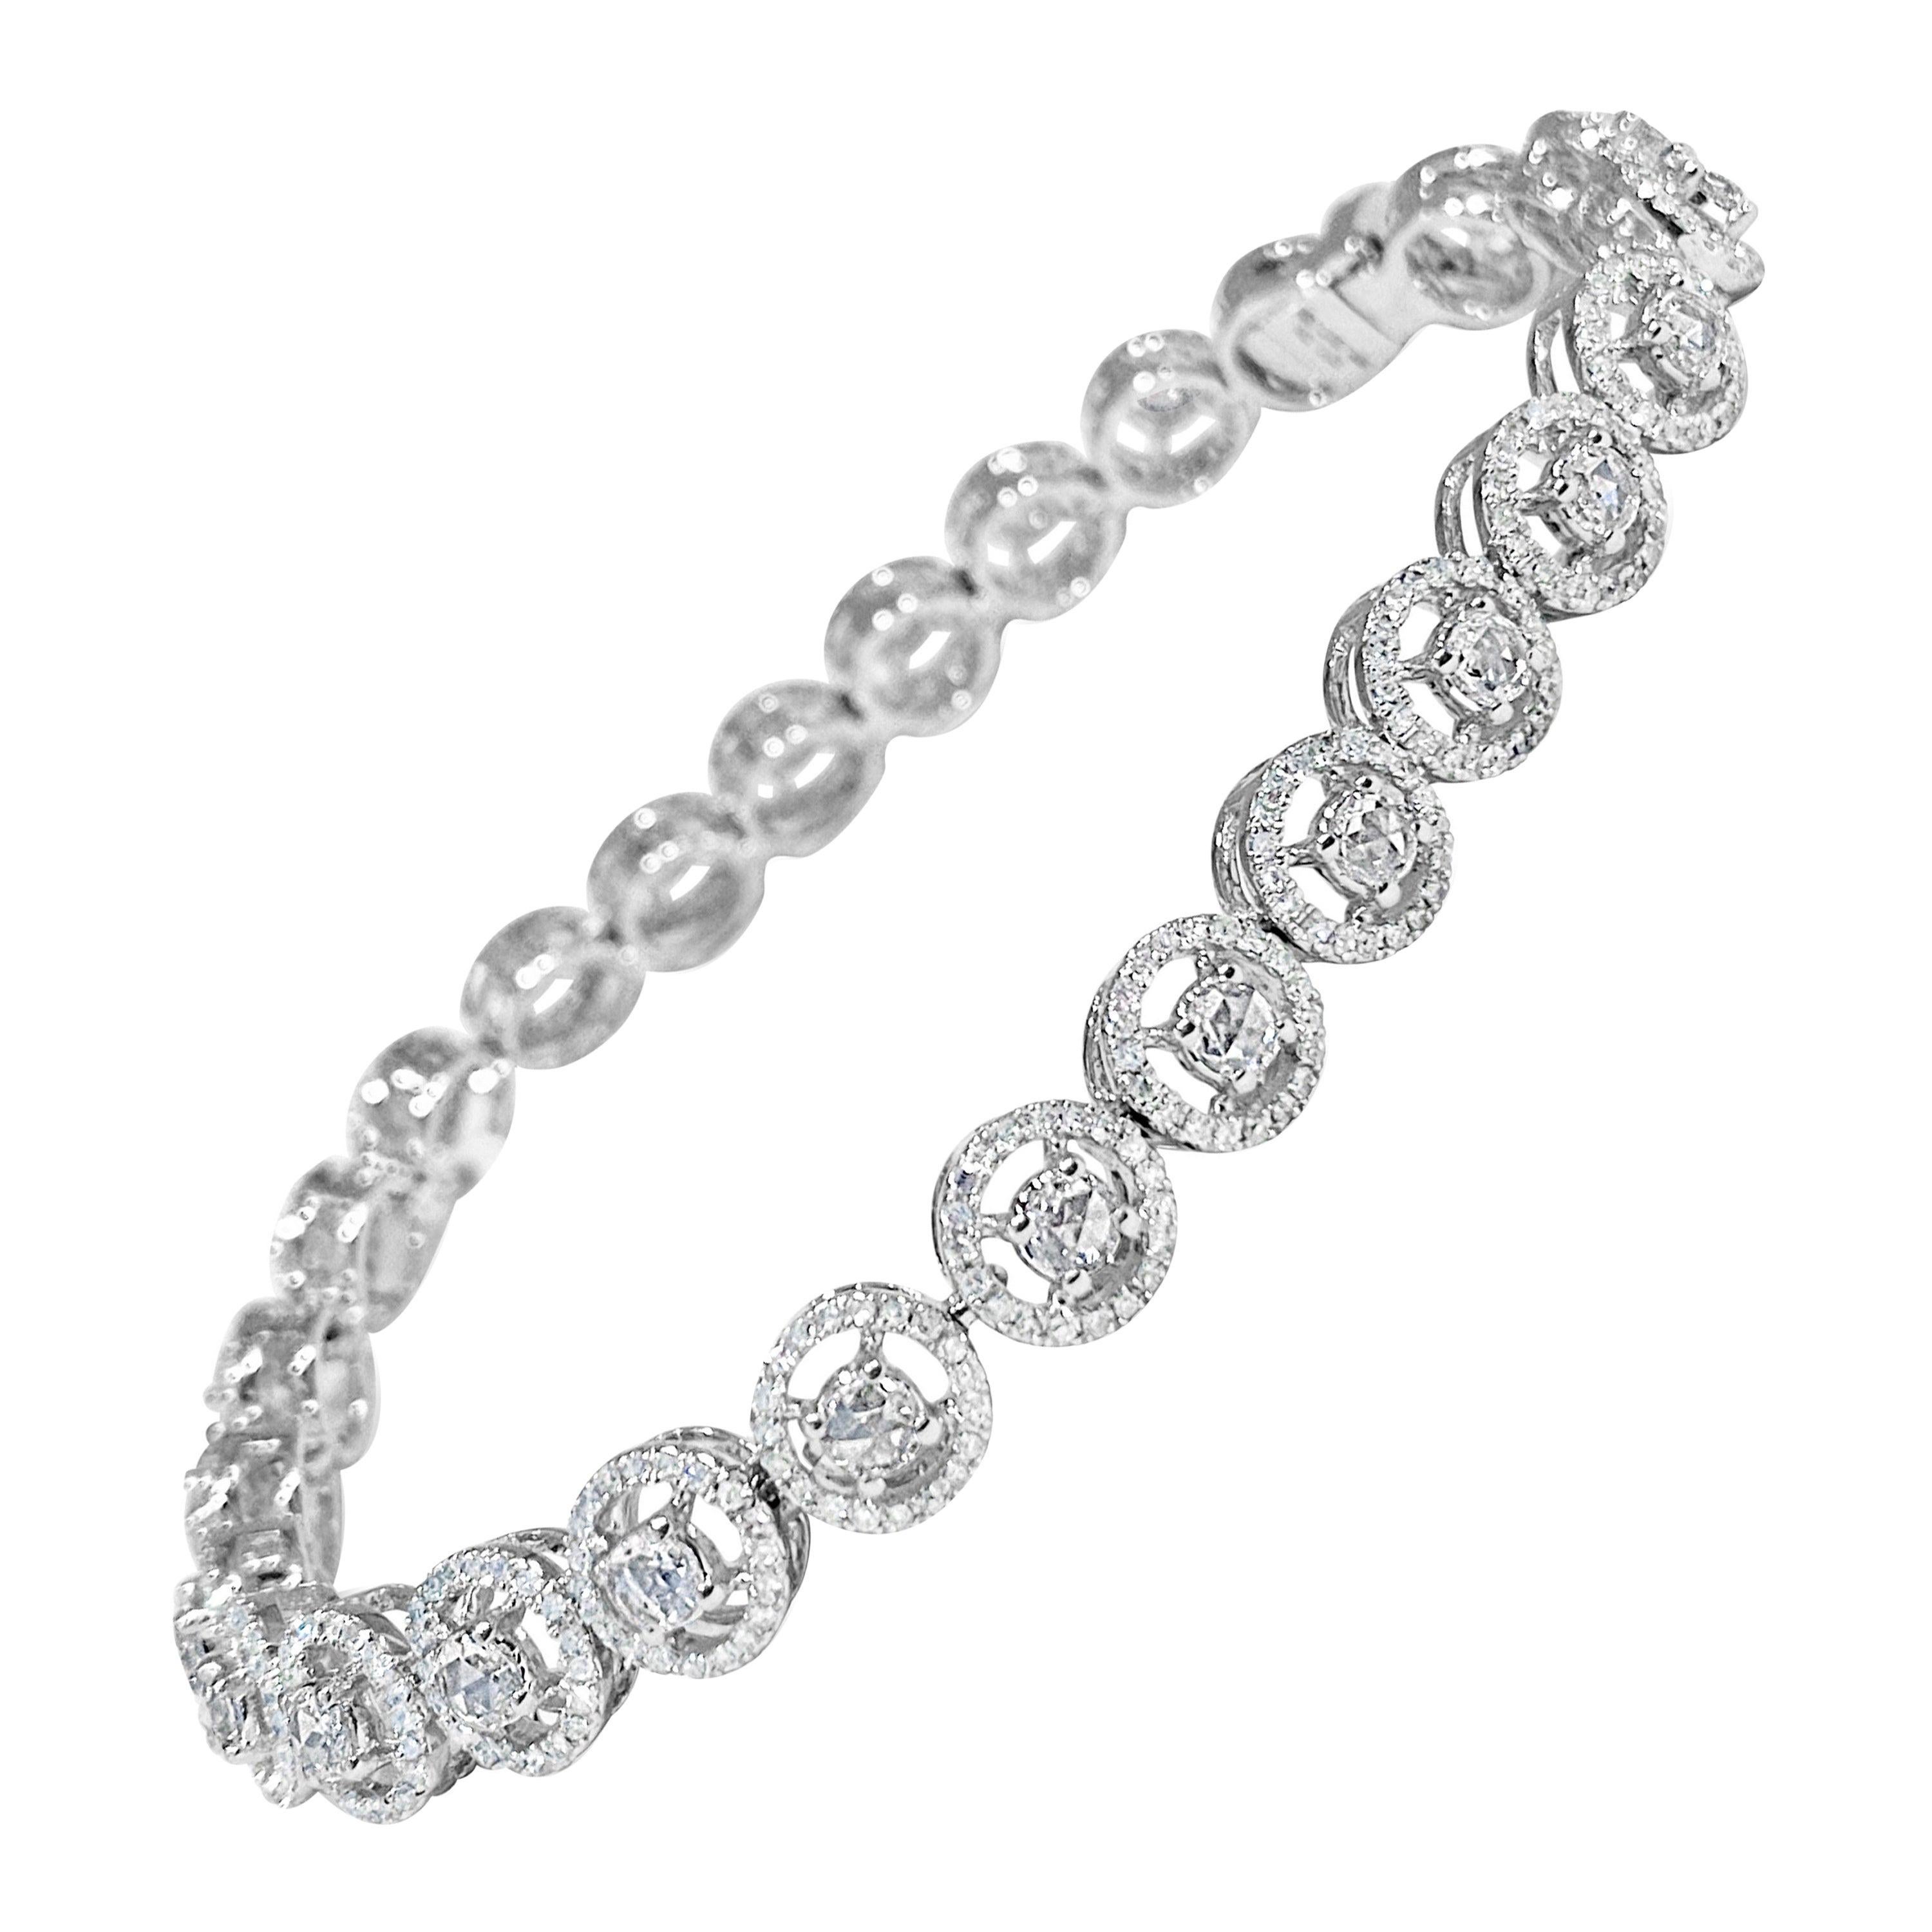 The Gina Bracelet 
Sophisticated and elegant, the Gina features a combination of rose cut diamonds and round brilliant diamonds, emitting a lasting glow of subtle brilliance.

Rose Cut Diamonds
Shape Round rose cut 
Color F
Clarity VS1
Weight 1.65